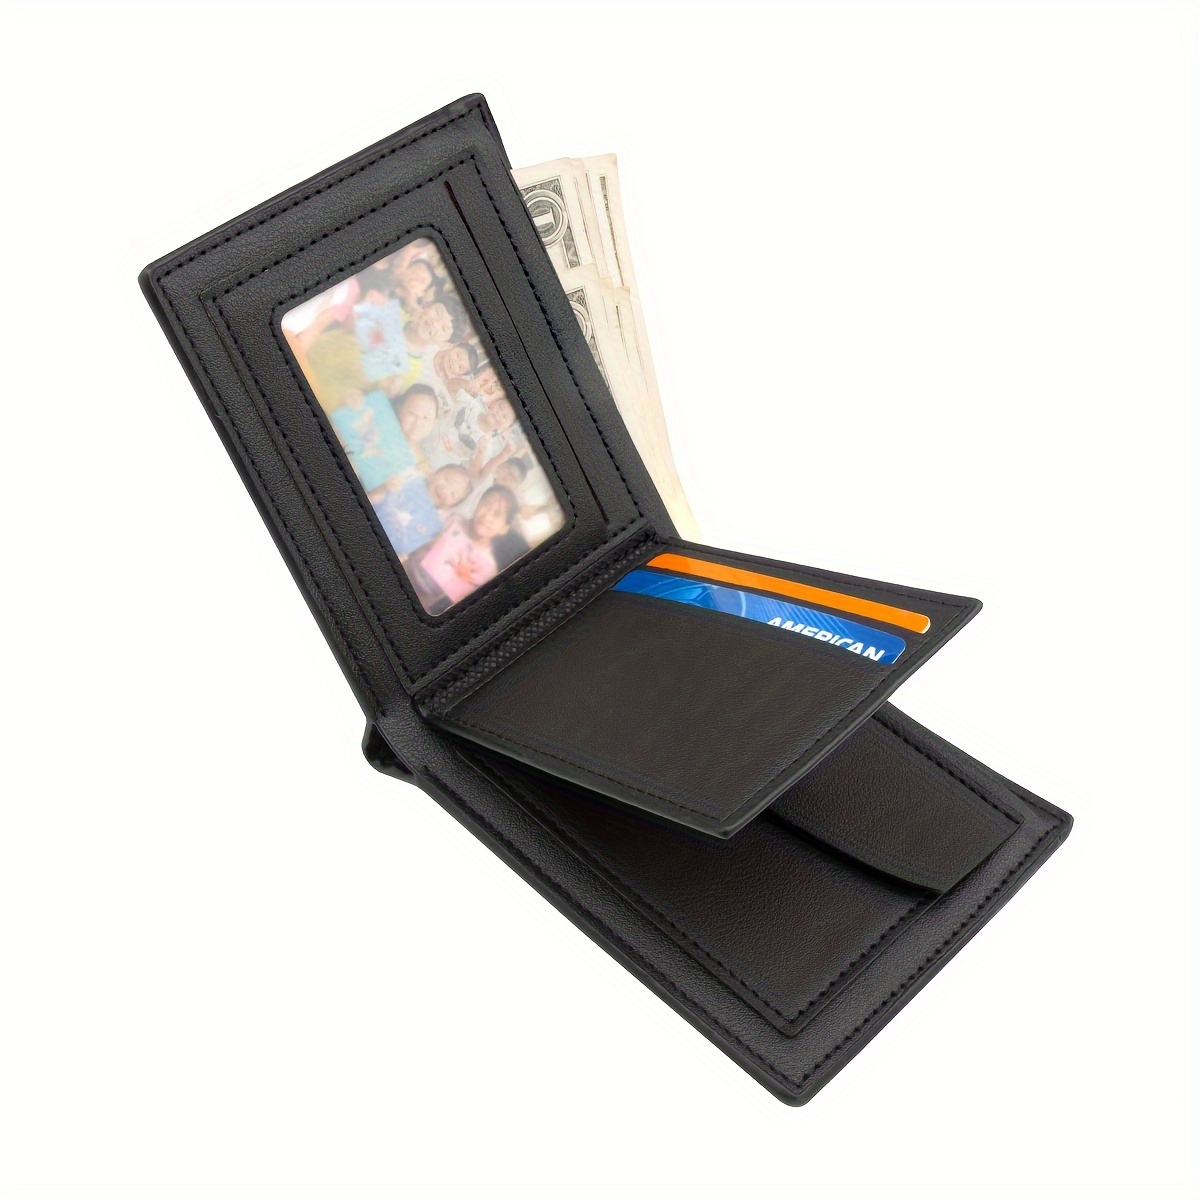 

Stylish Men's Bifold Wallet With Id Window - Secure Storage, Pu Leather In Blue - Ideal Birthday Gift